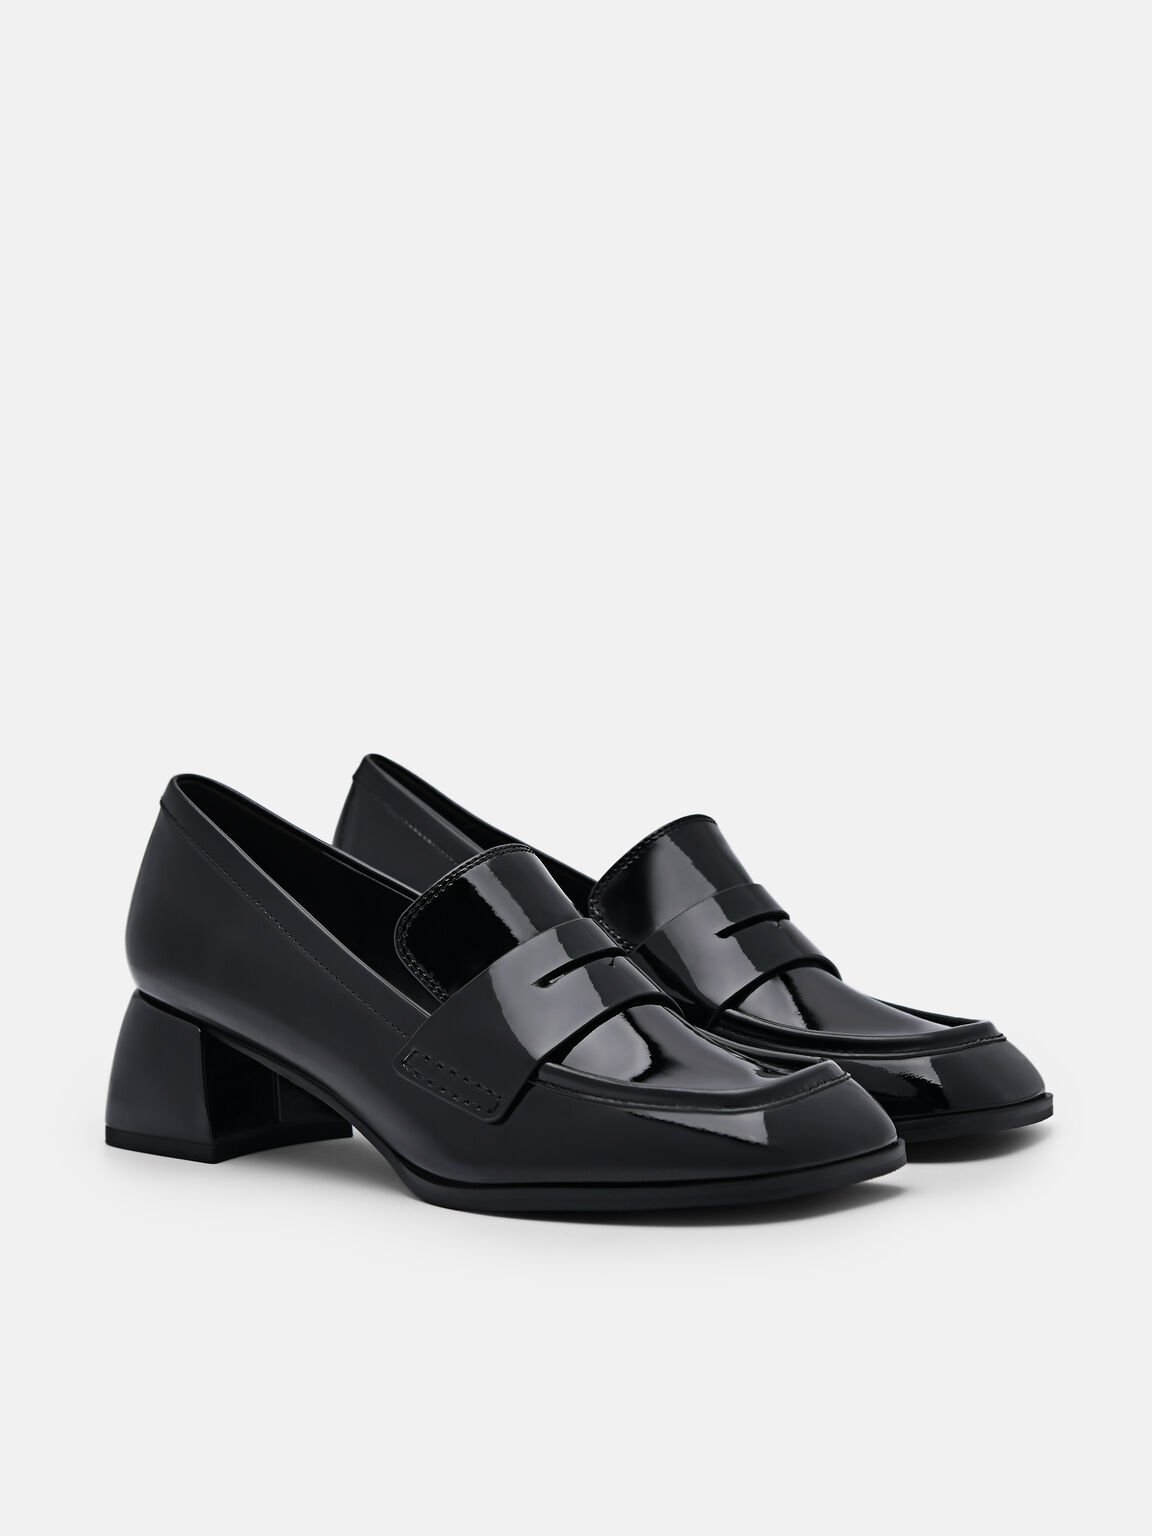 Maggie Leather Heel Loafers, Black